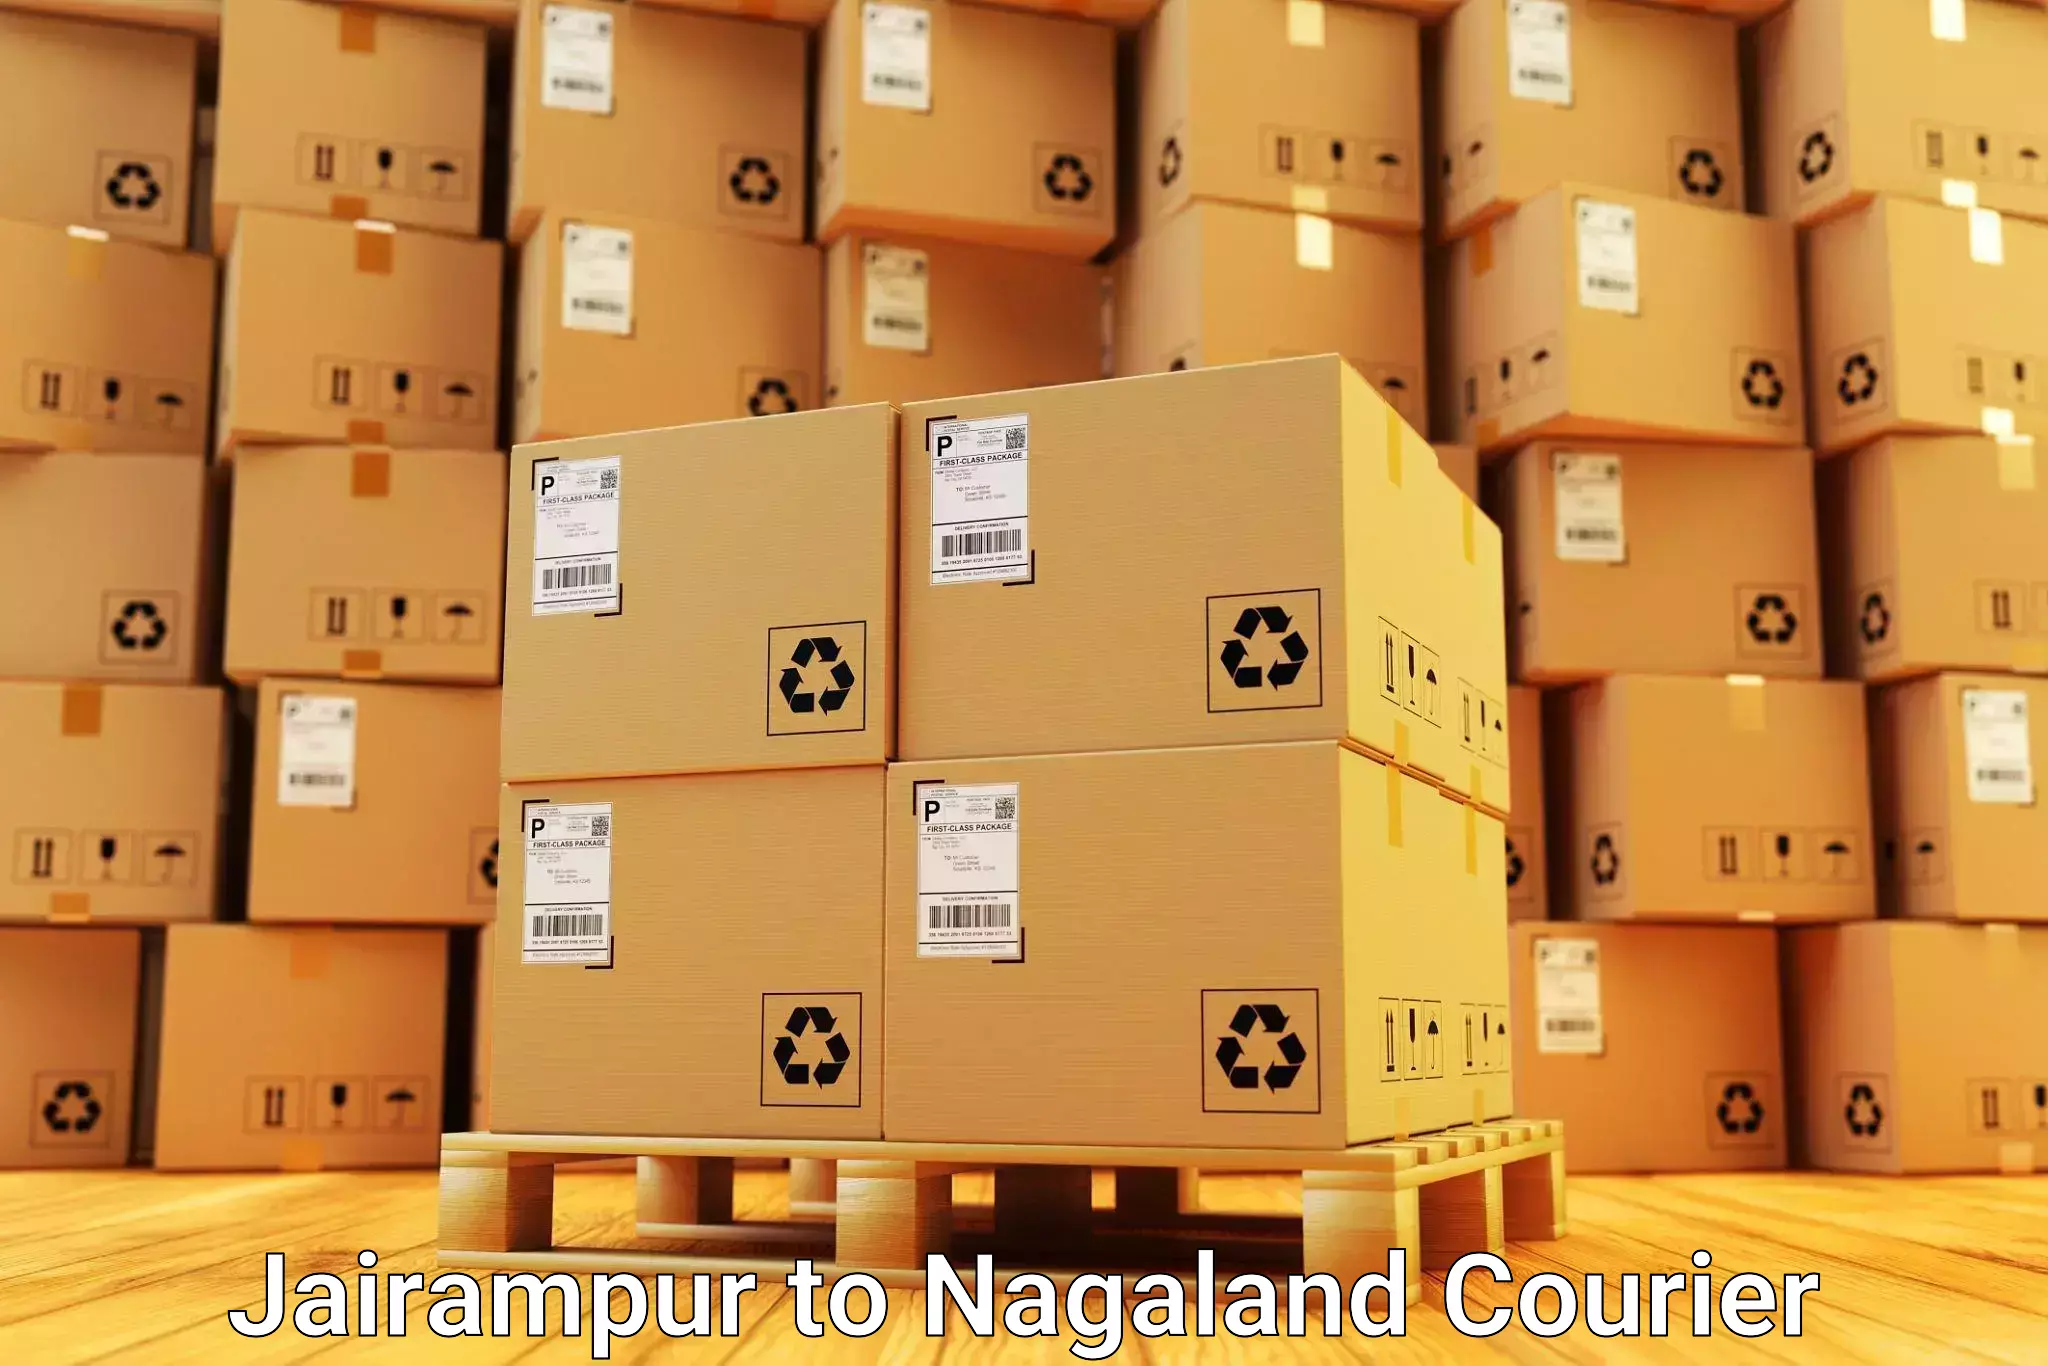 Moving and storage services in Jairampur to Nagaland